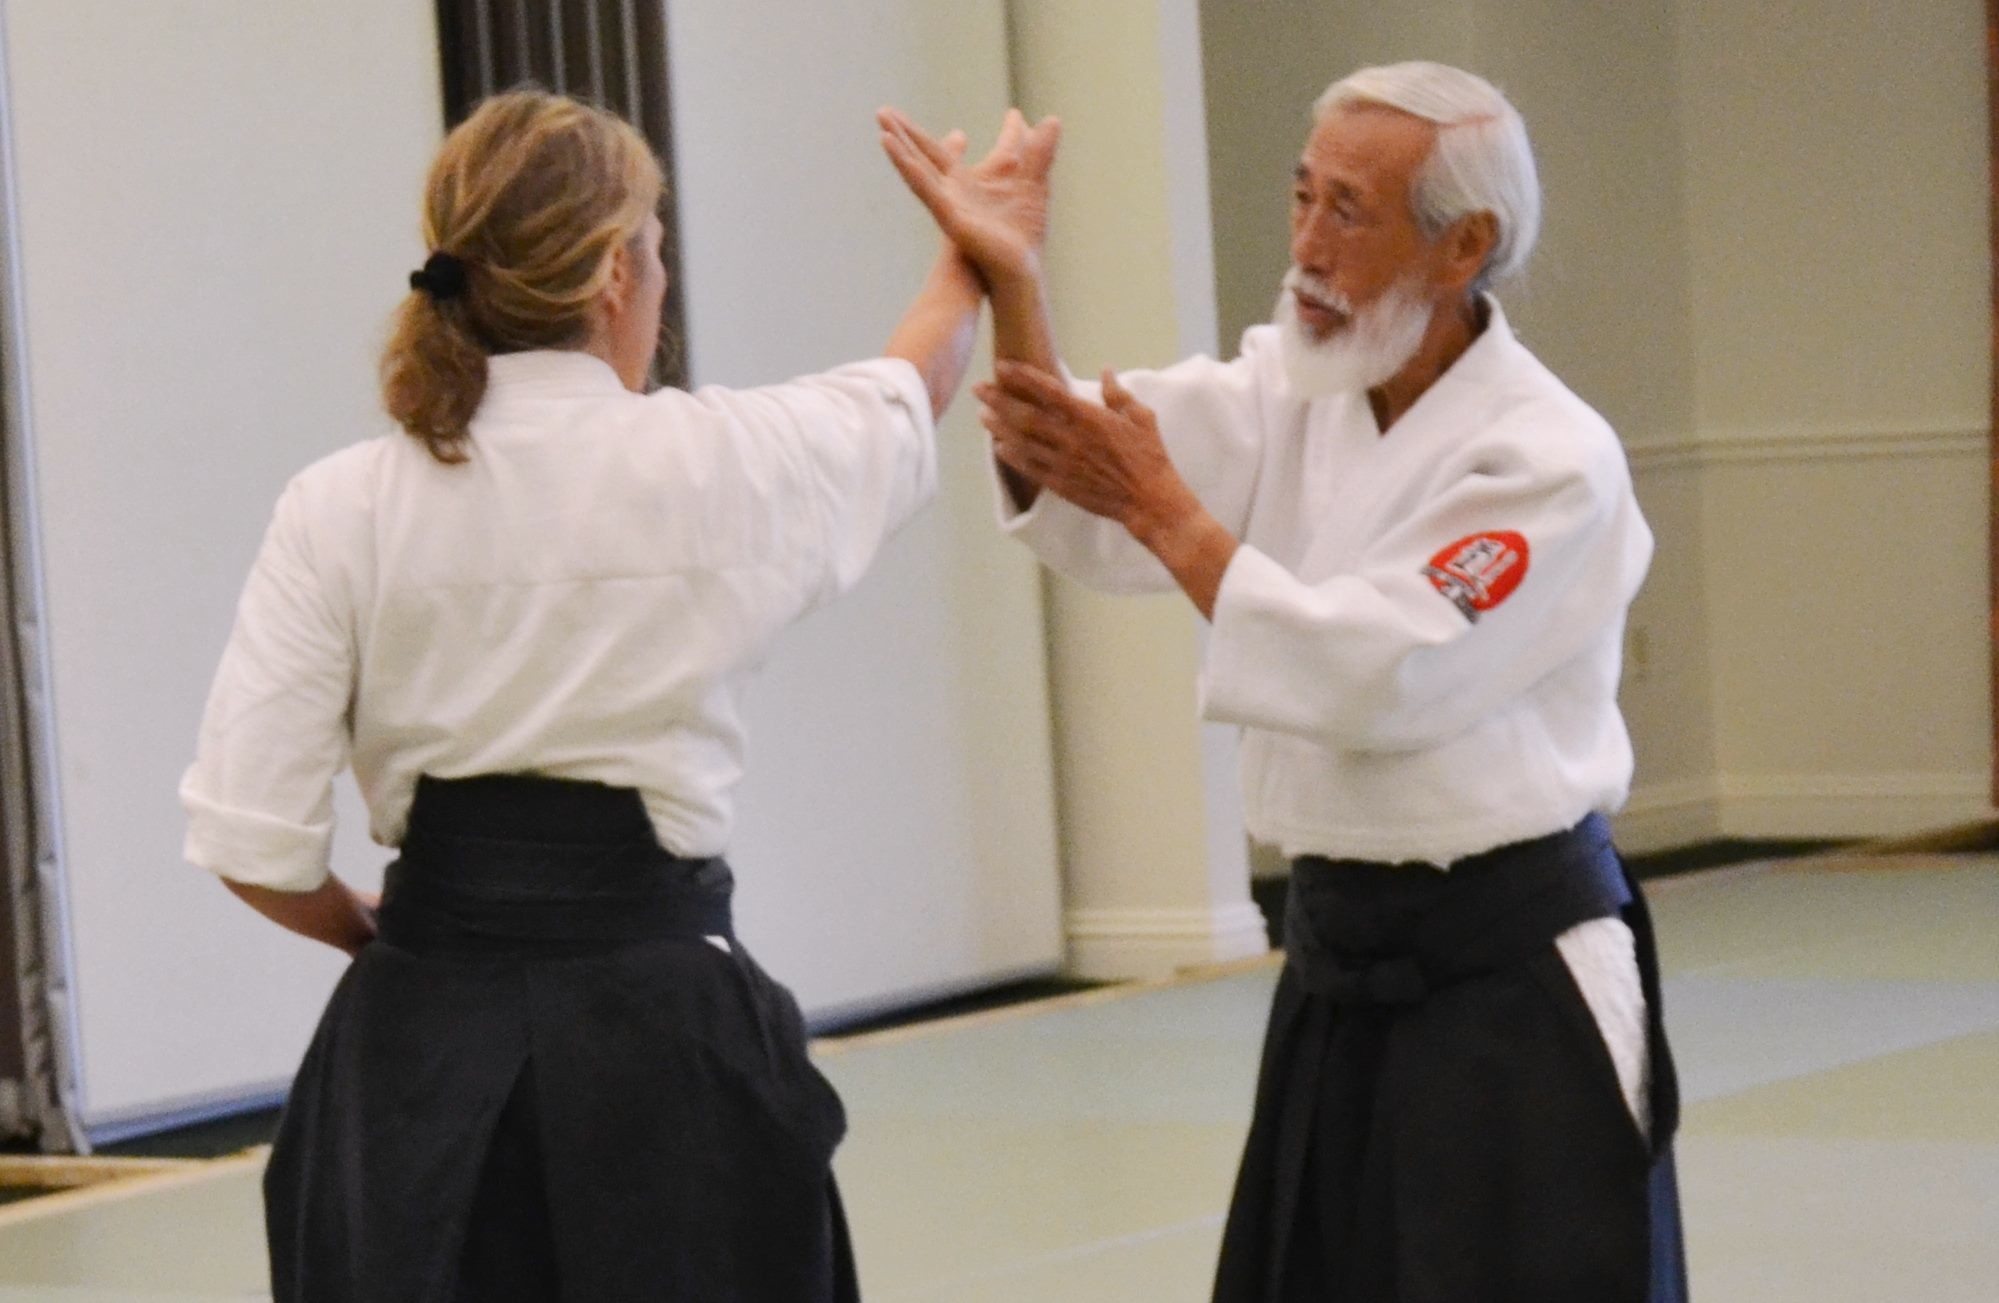 Aikido | Martial Arts | Aikido in South Africa